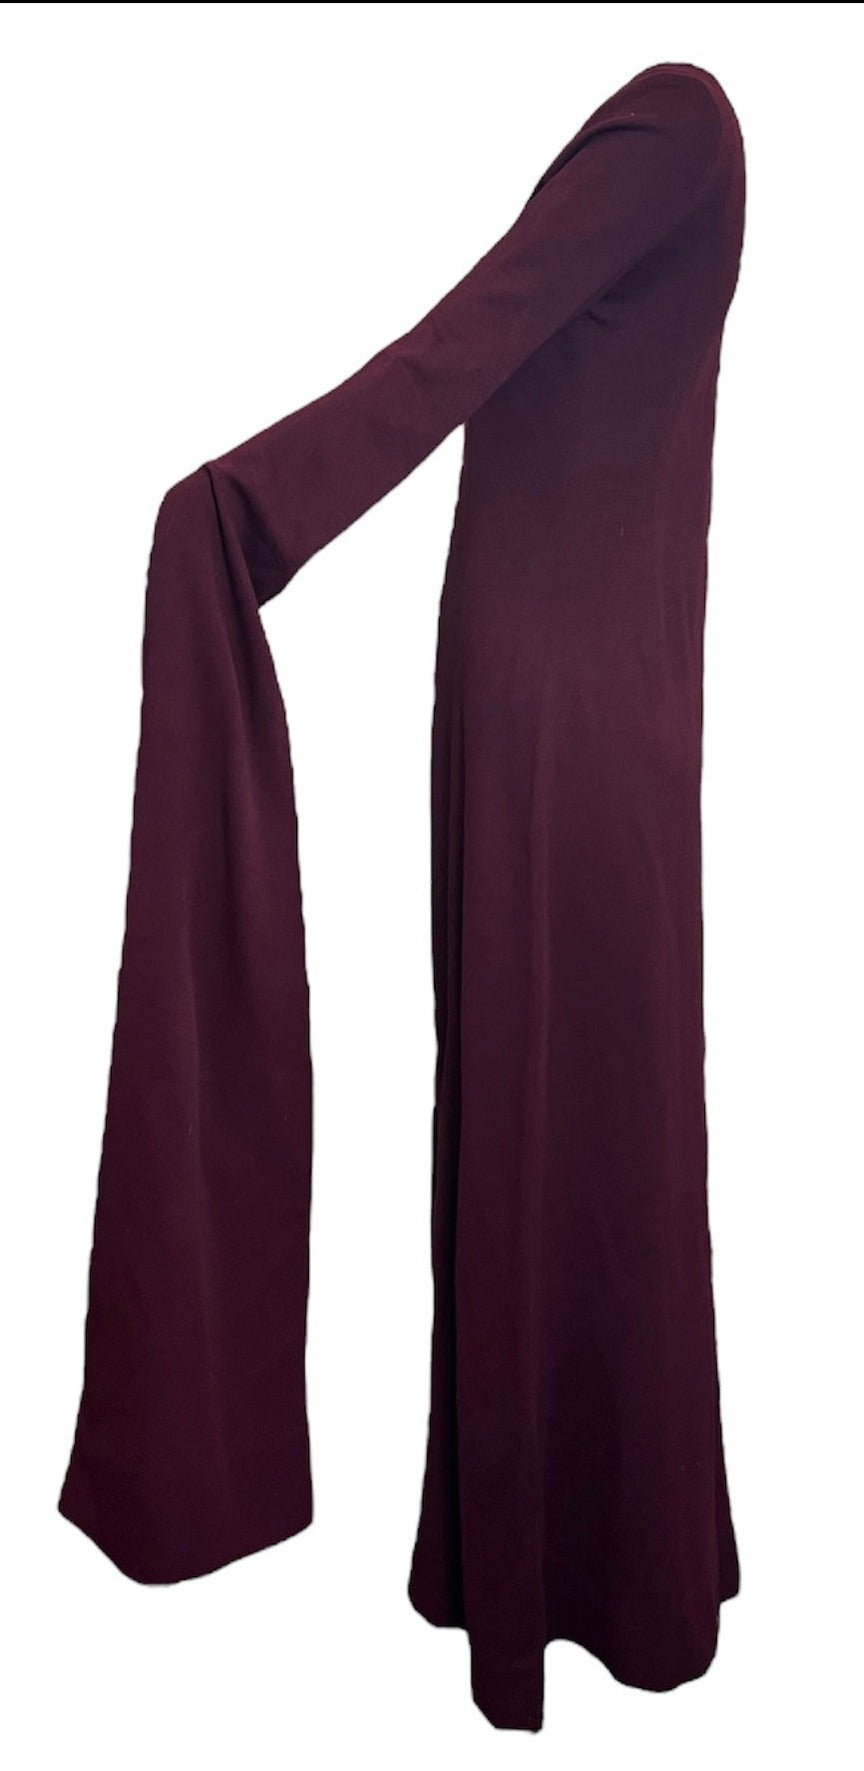 Joshua Tree California 1970s Wine Colored Maxi Dress with Medieval Sleeves  SIDE 2 of 4